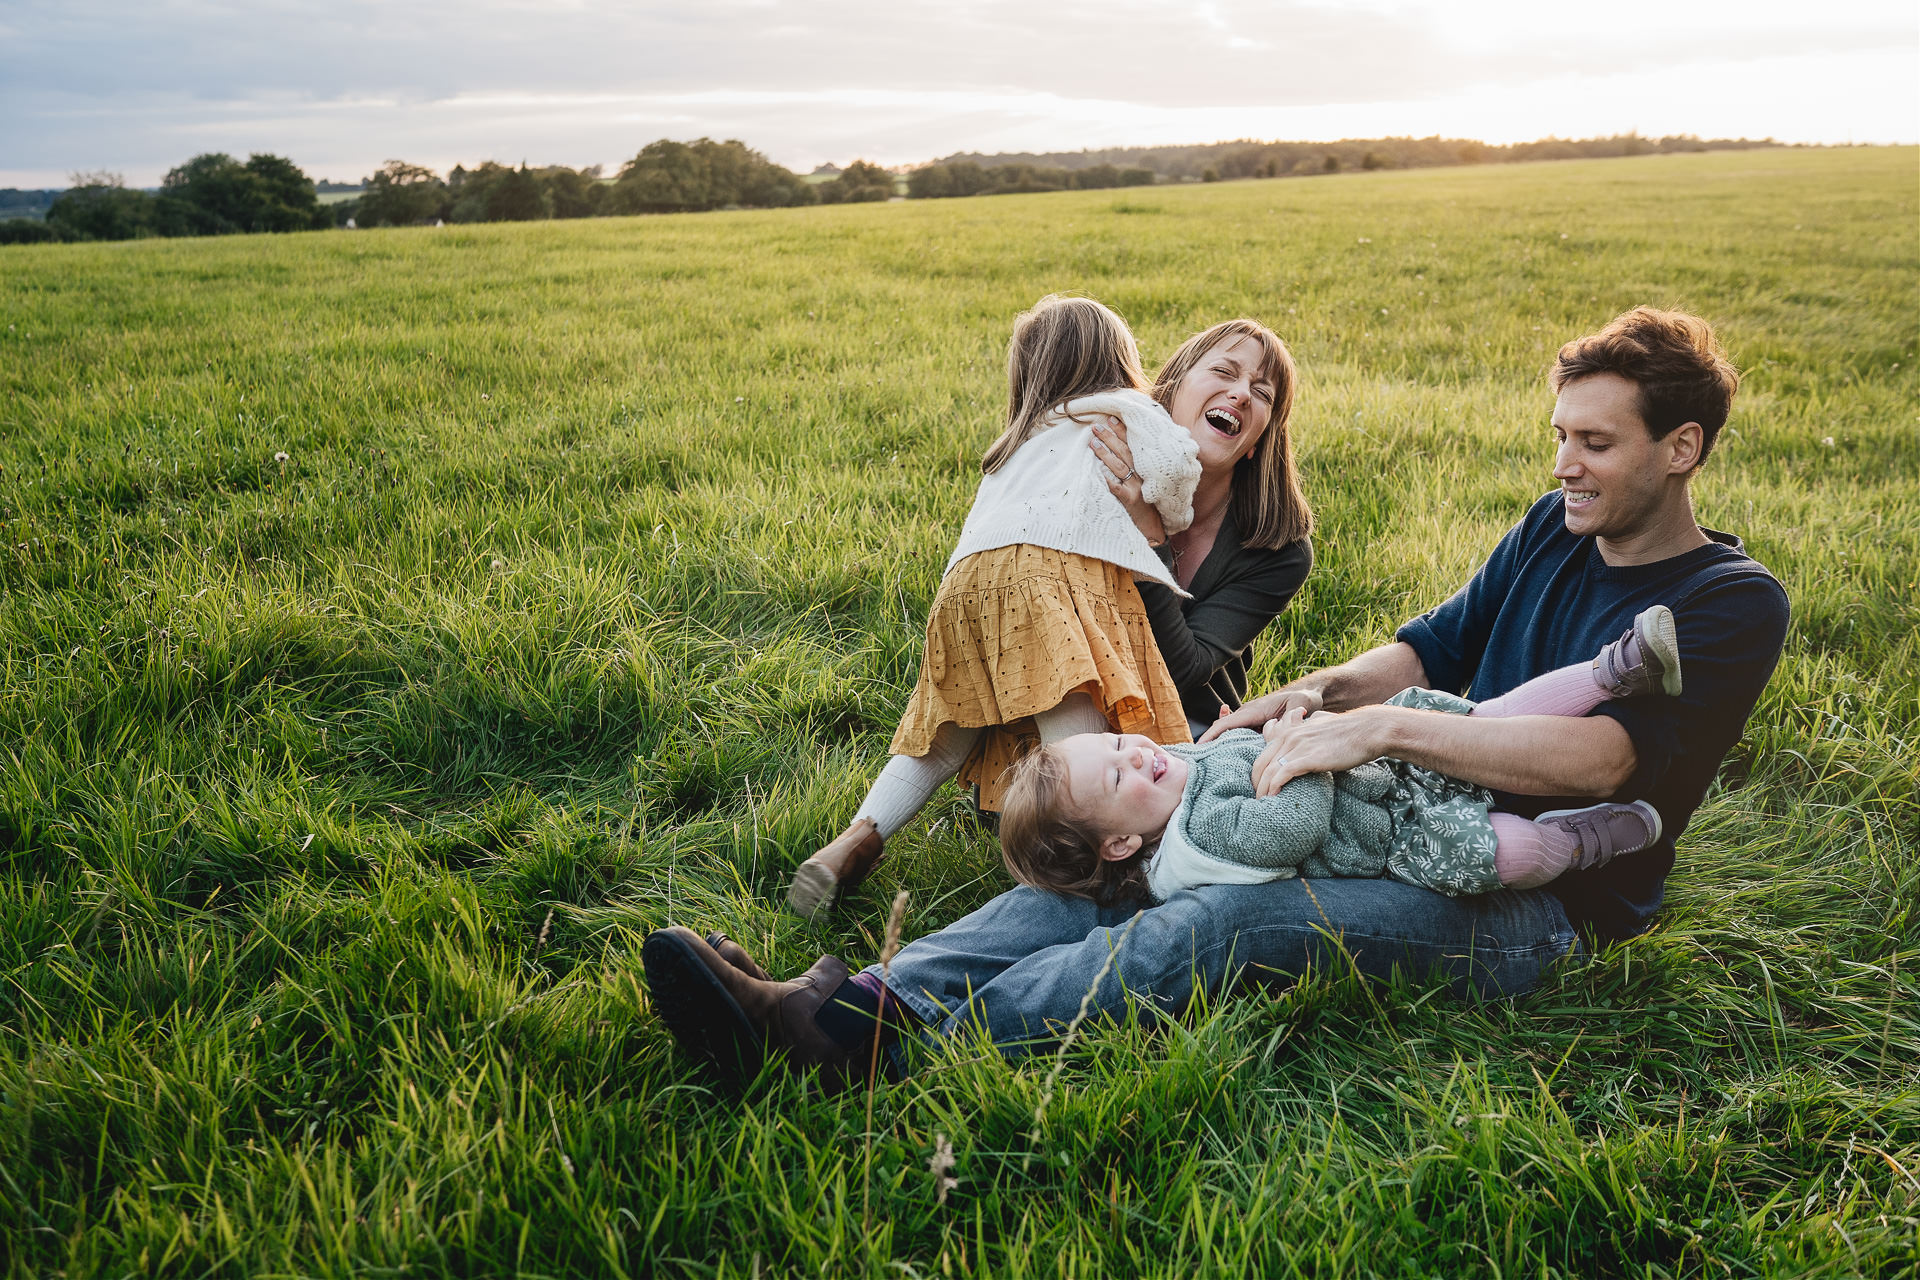 Two parents and children laughing and cuddling in a field